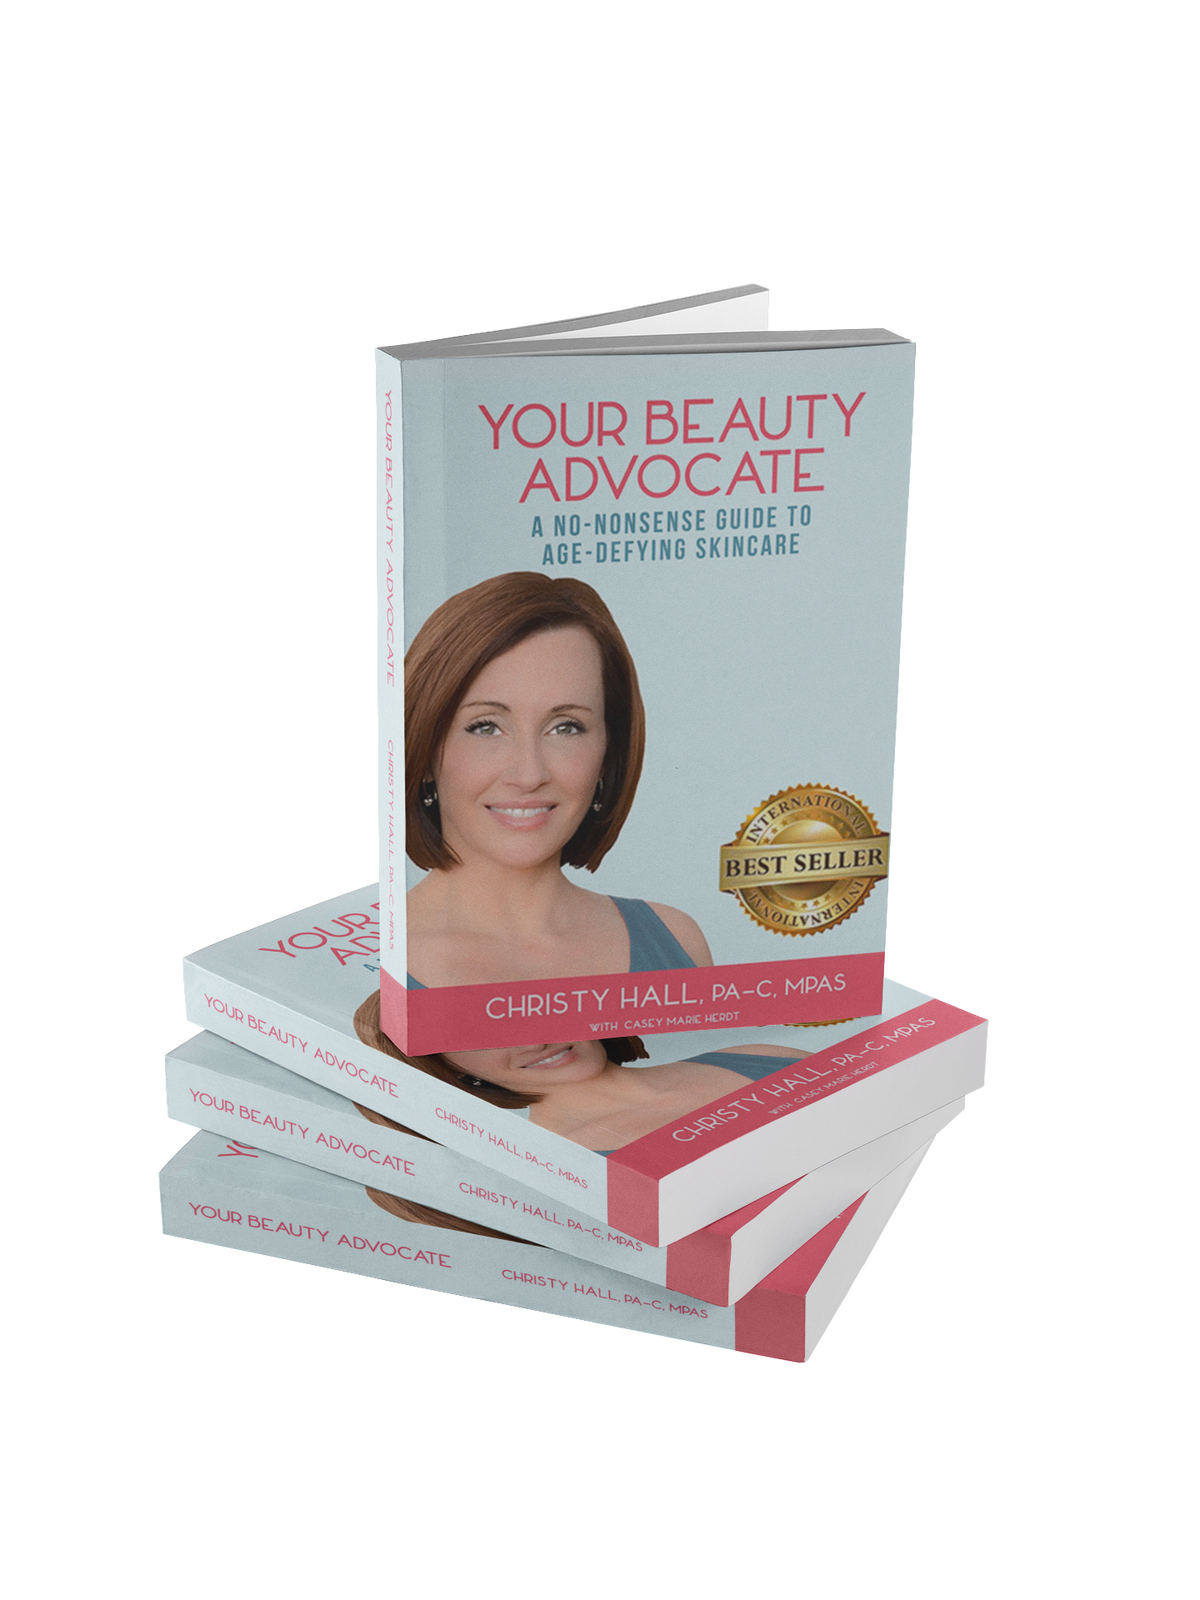 Your Beauty Advocate: International Best Seller Book by Christy Hall | Shop Mikel Kristi